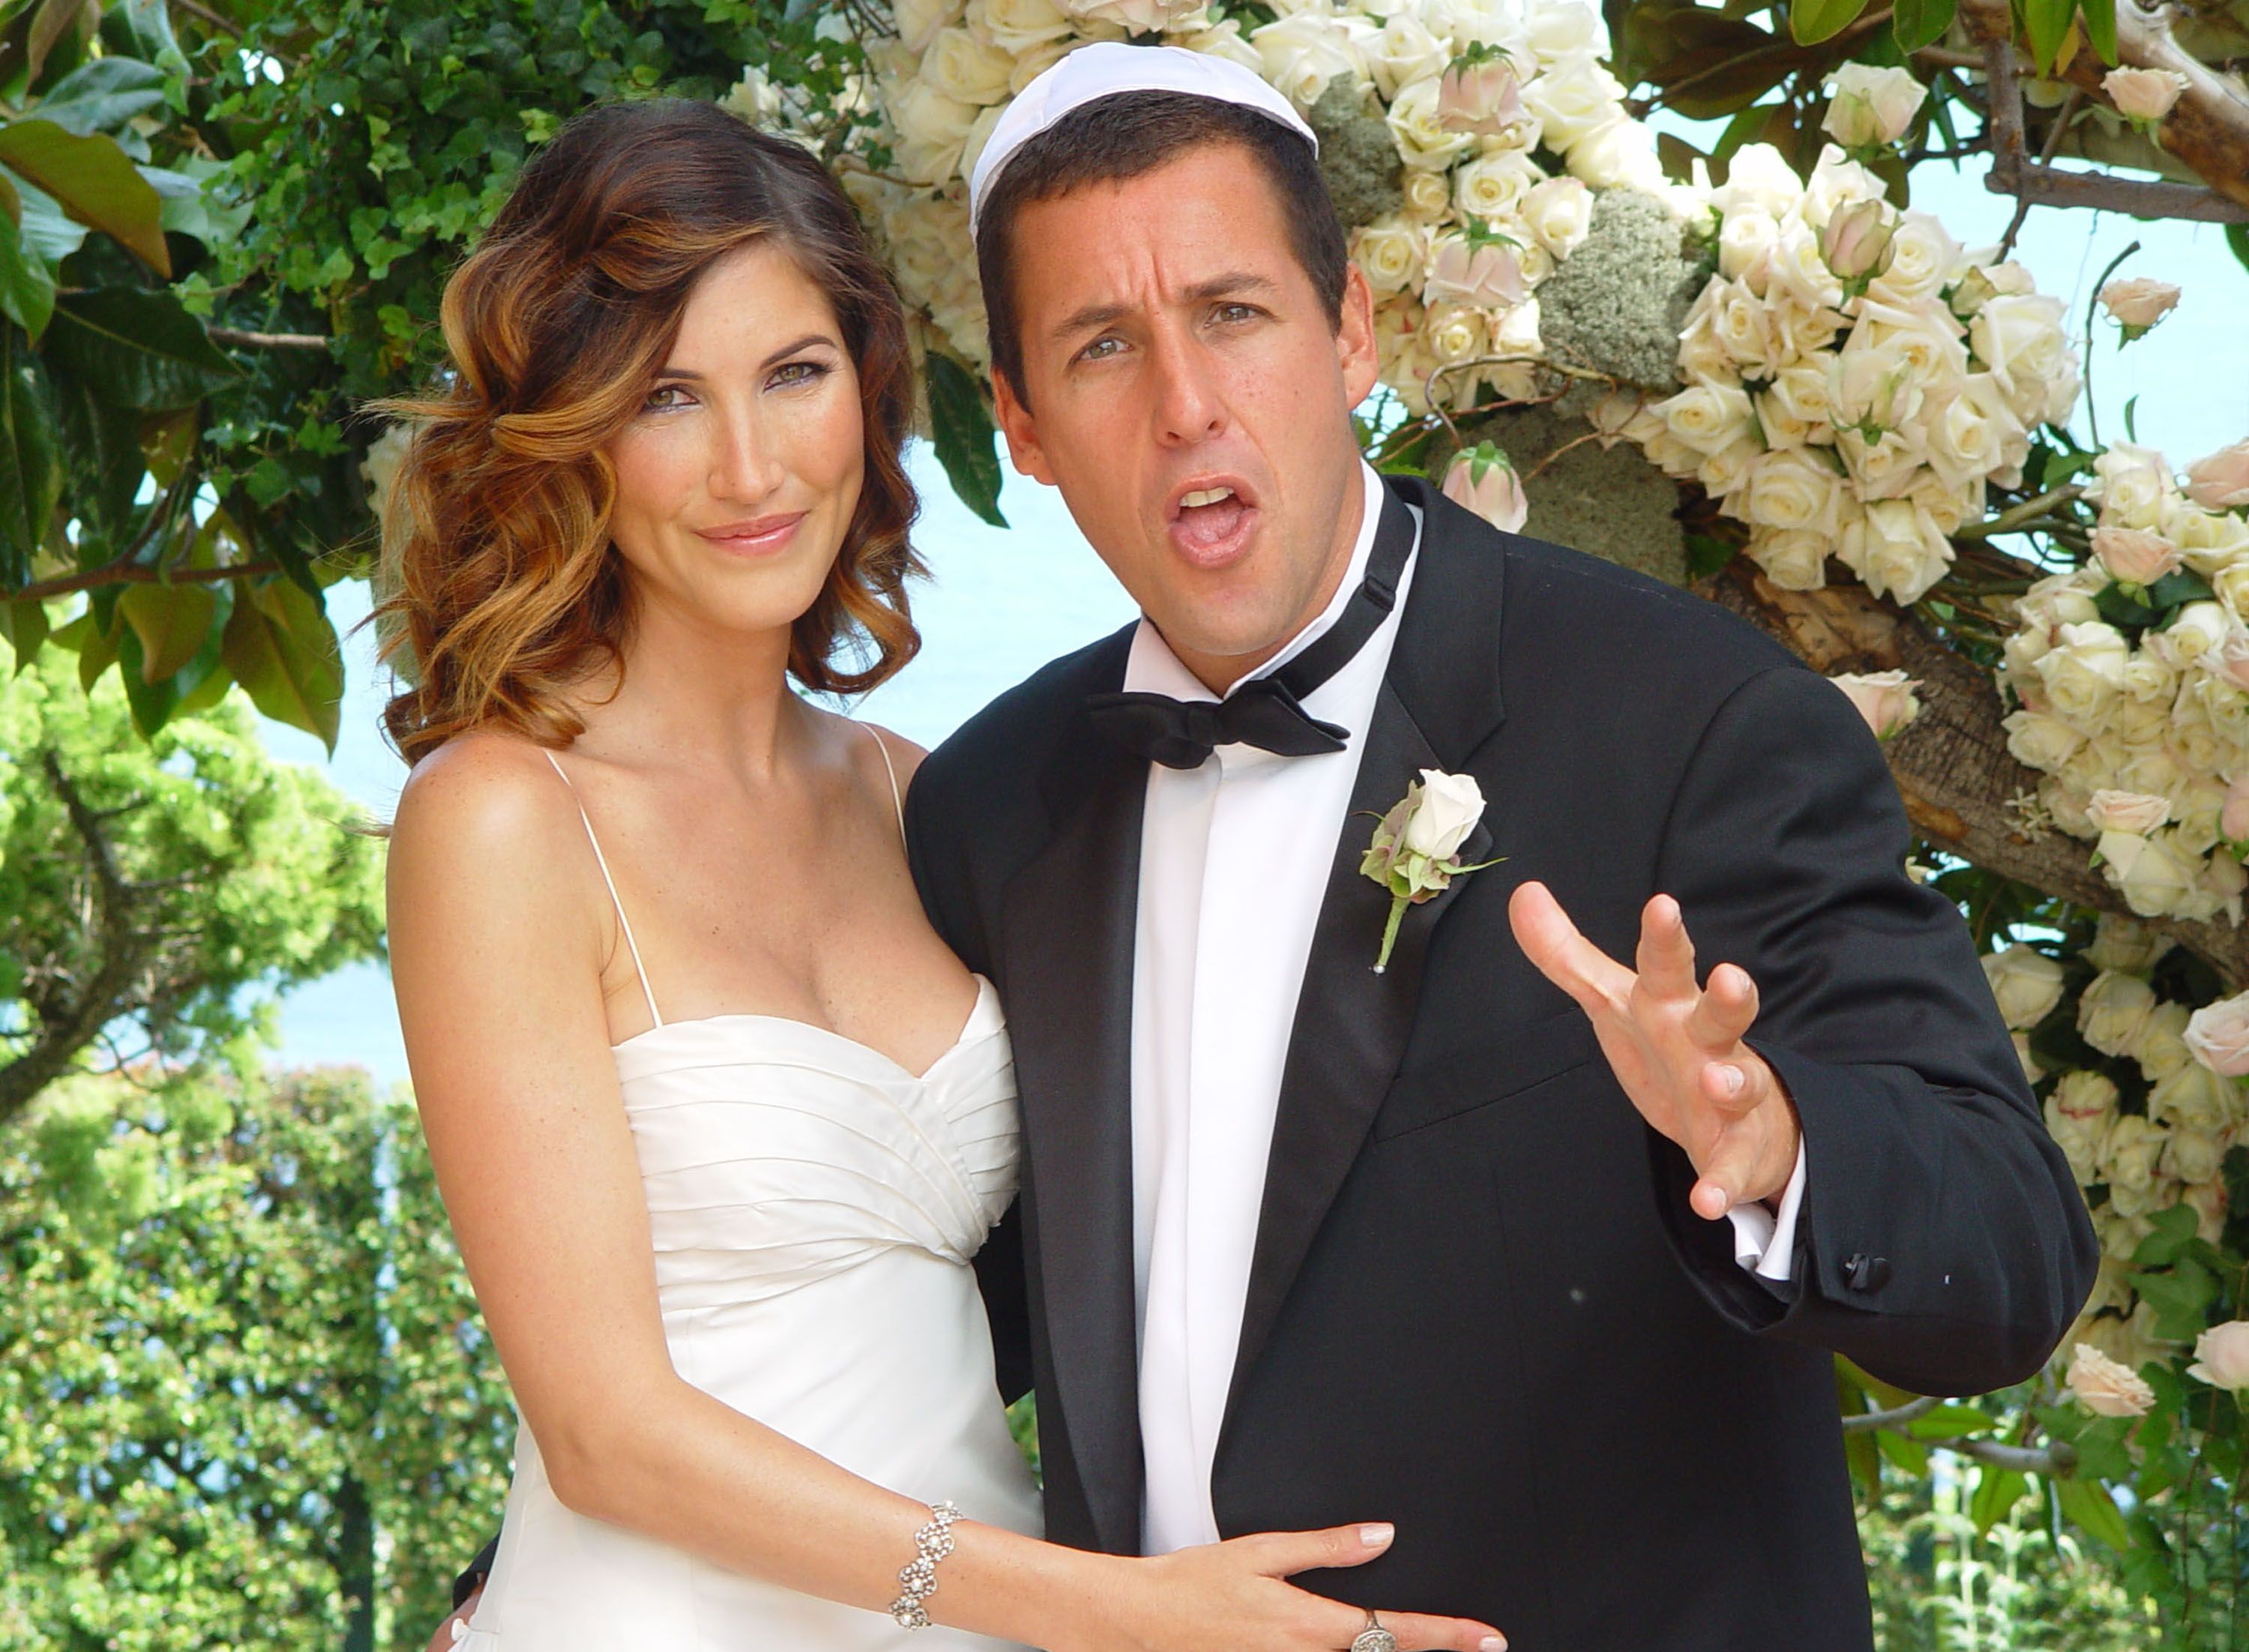 Adam Sandler and Jackie Titone on their wedding day in 2003 | Souce: Getty Images